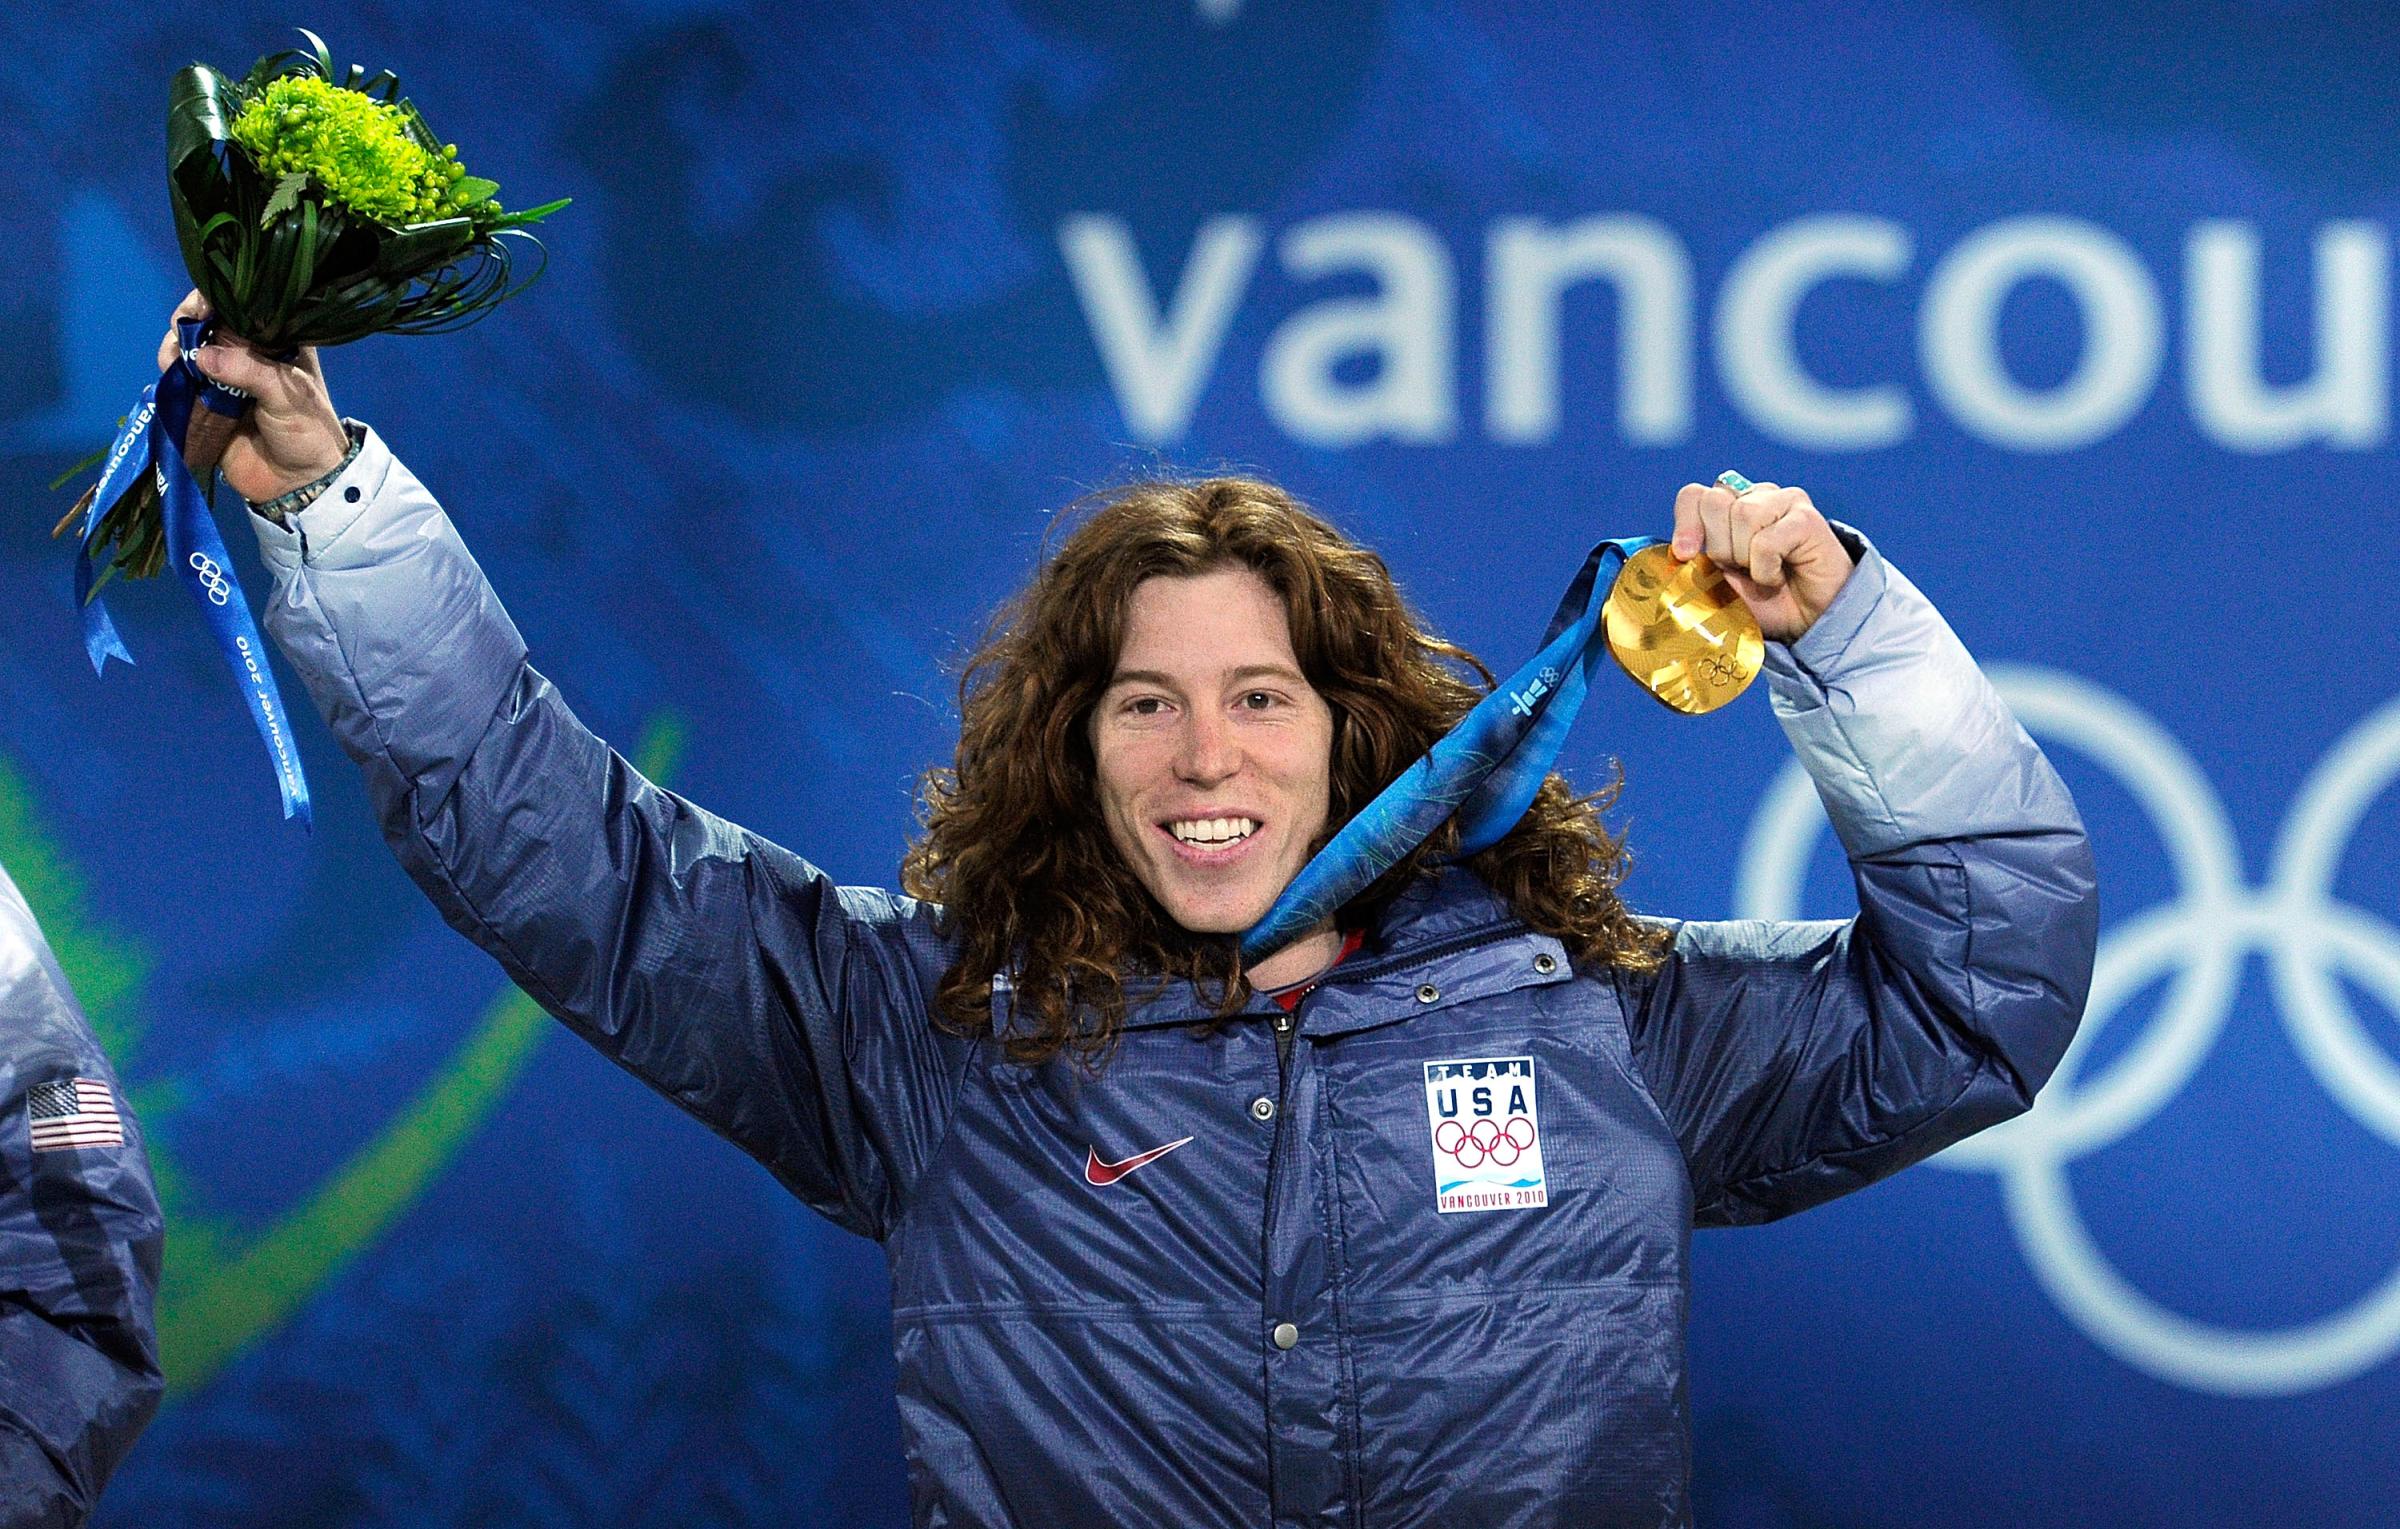 Vancouver Medal Ceremony - Day 7